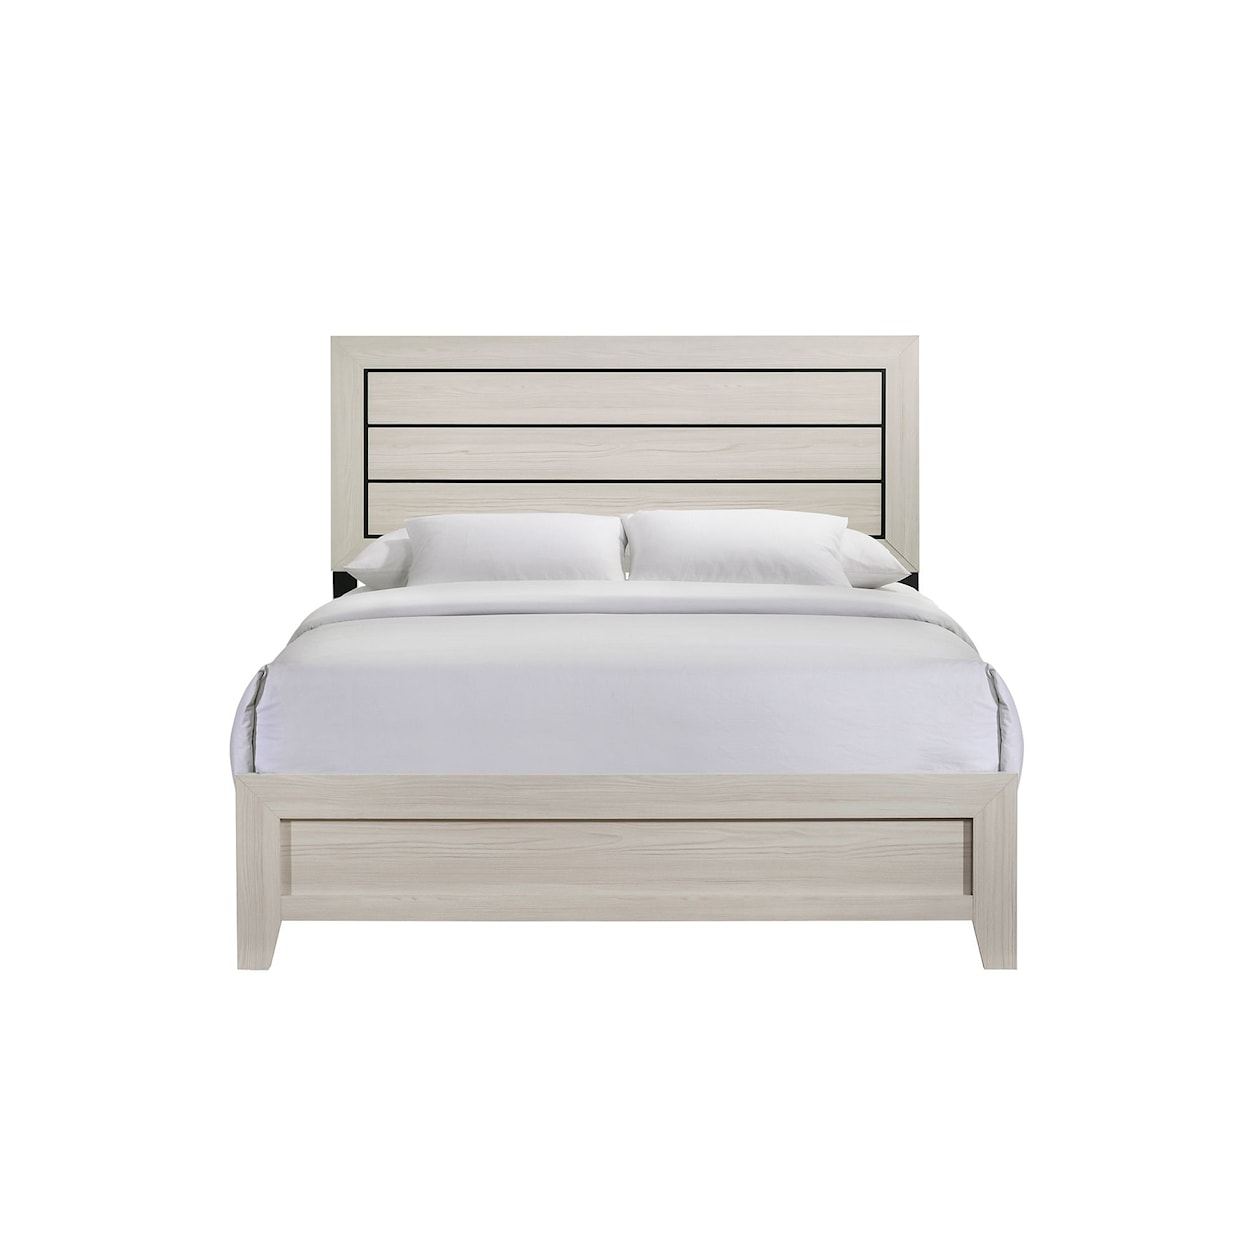 Elements Makayla Queen Bed